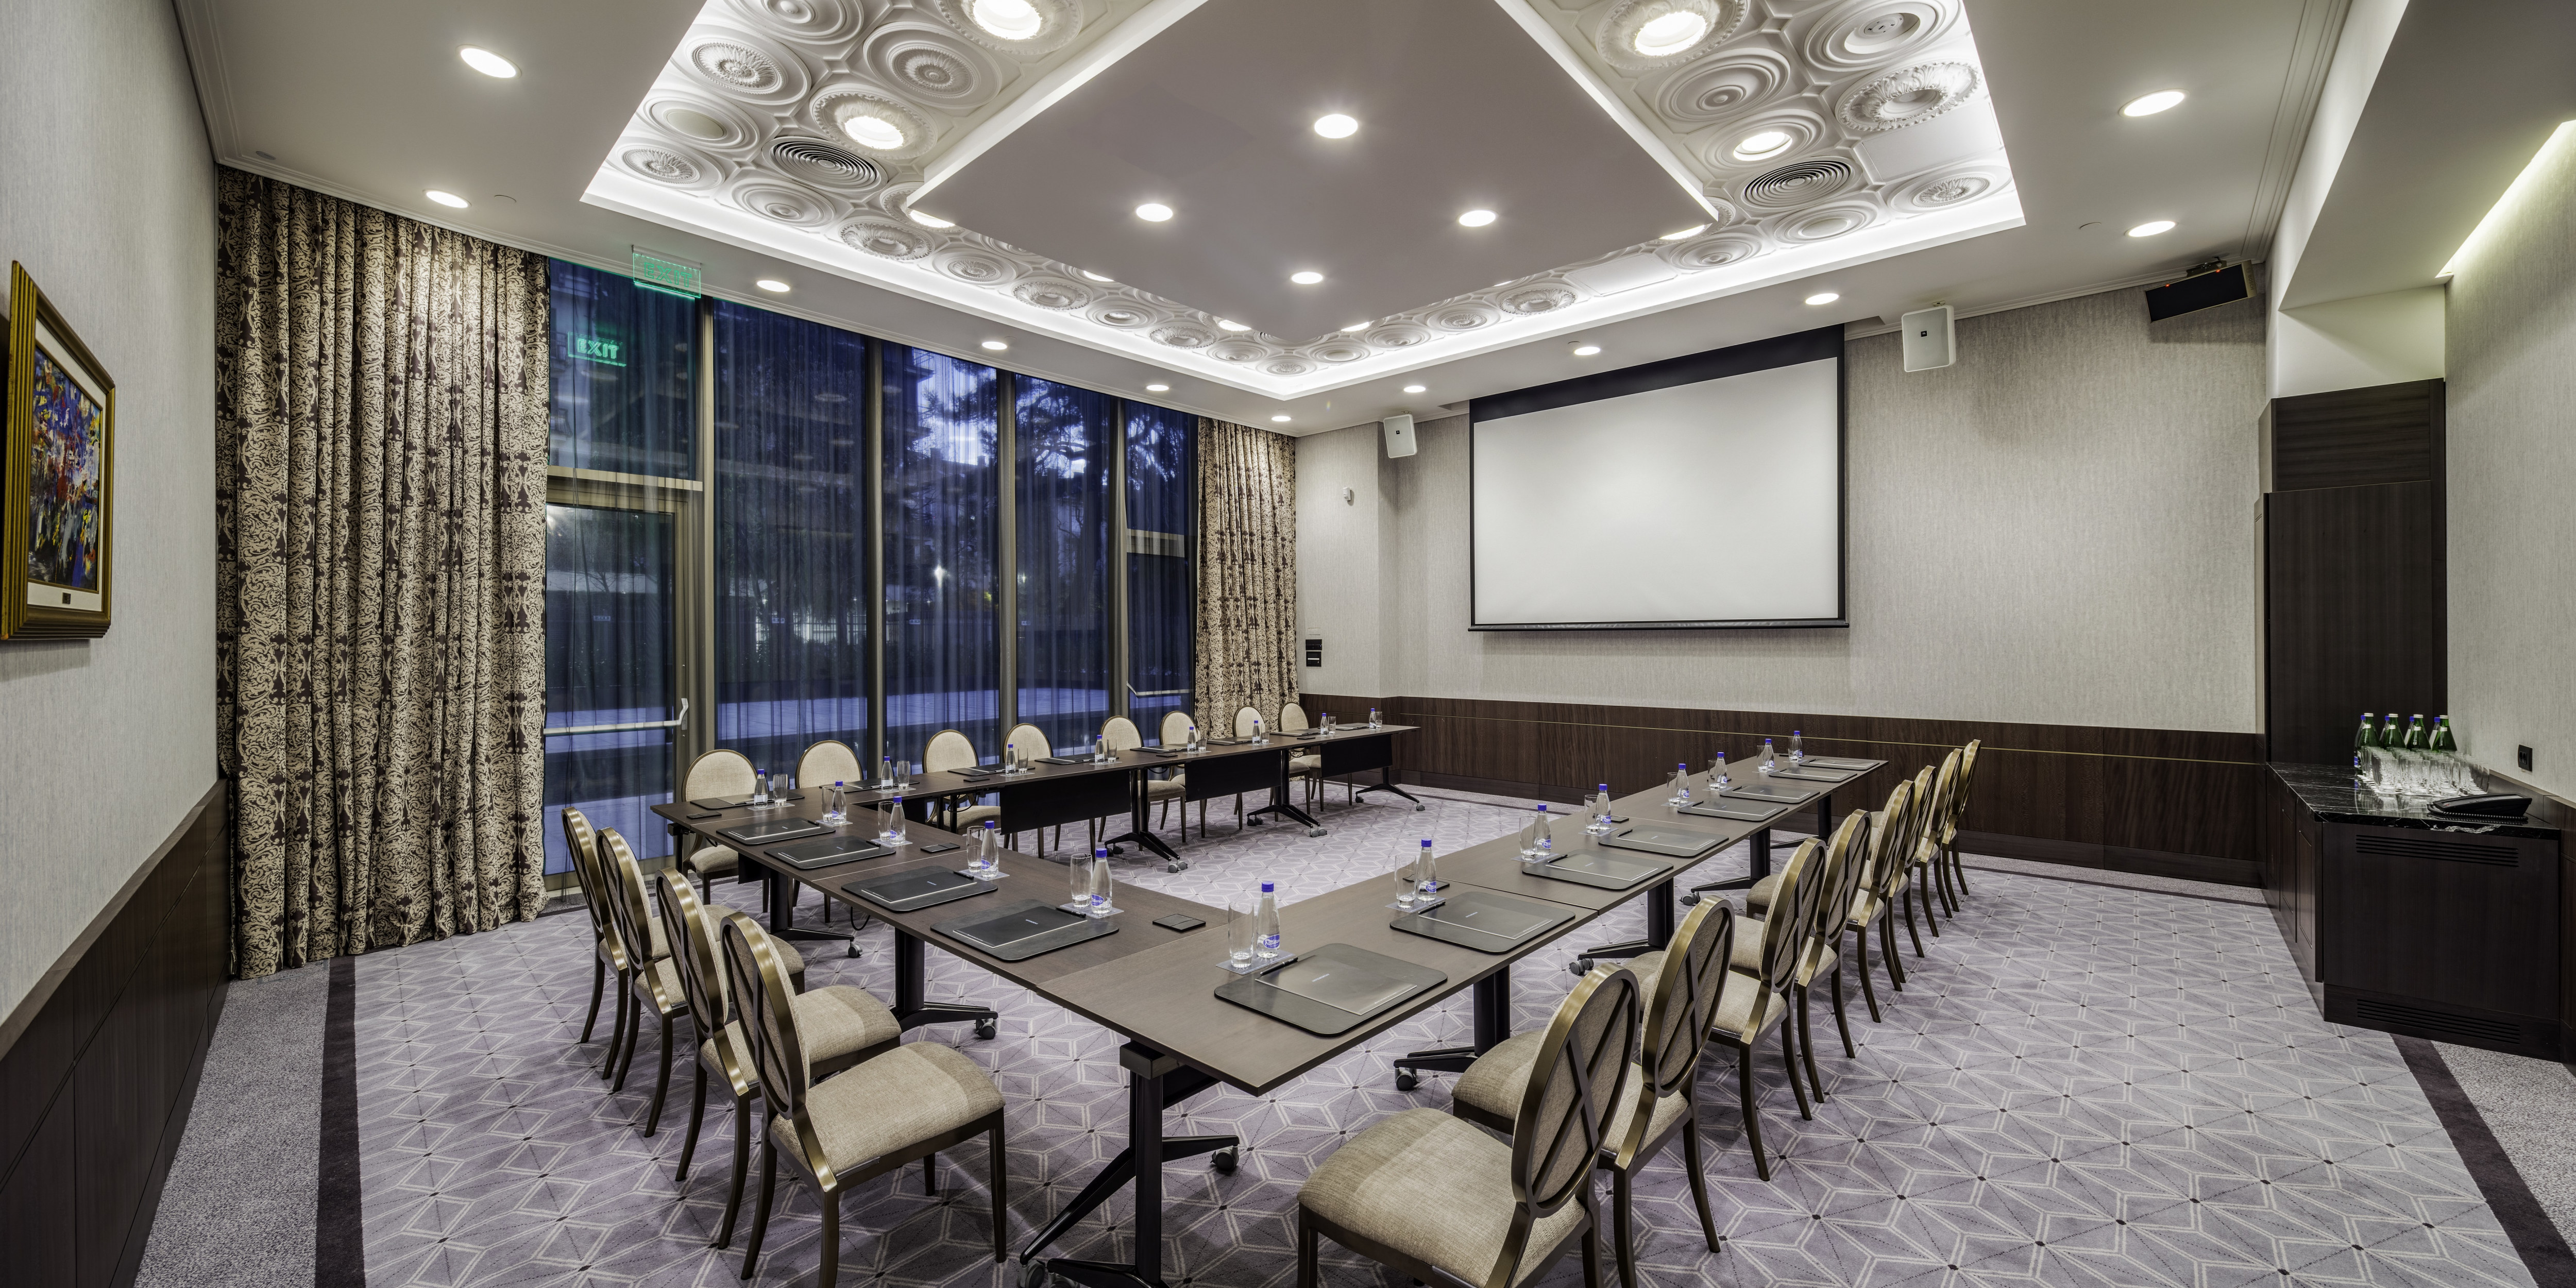 Meeting Room with U-Shaped Table and Projector Screen